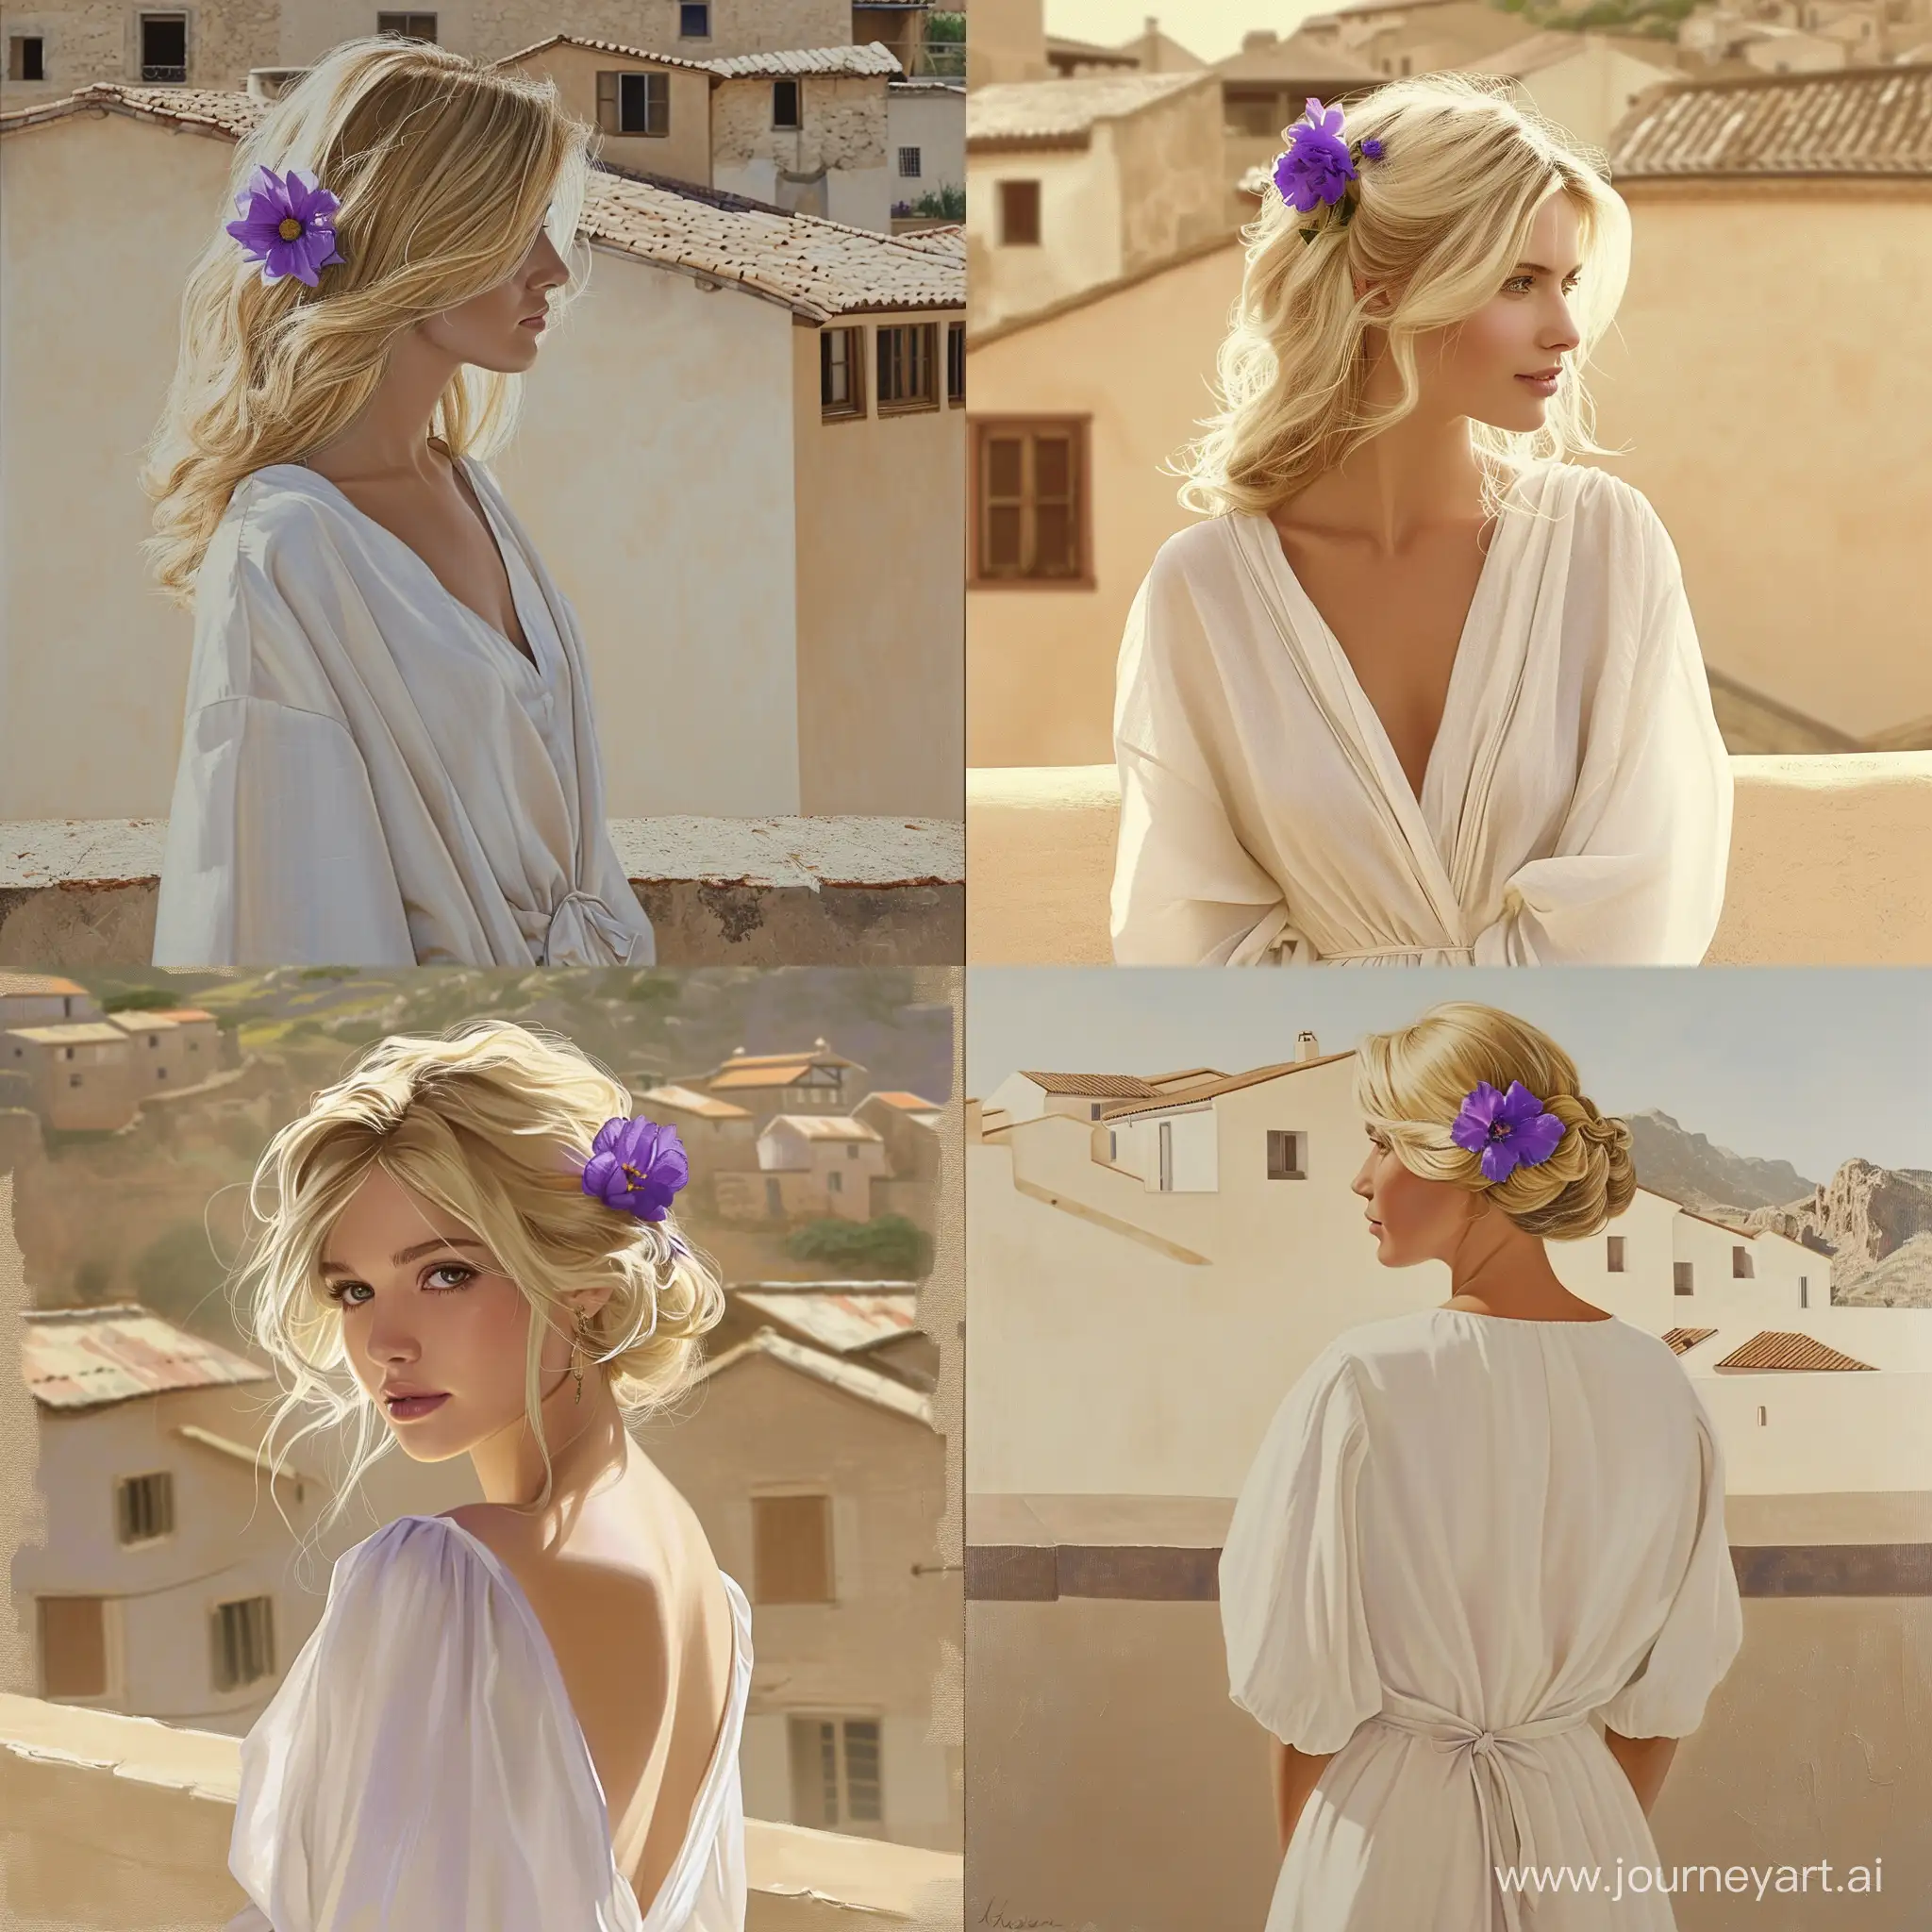 A blonde, sophisticated French woman, in a white silk dress, with a purple flower in her hair. Against the background of a beige terrace or cottage village, the background must be gently light